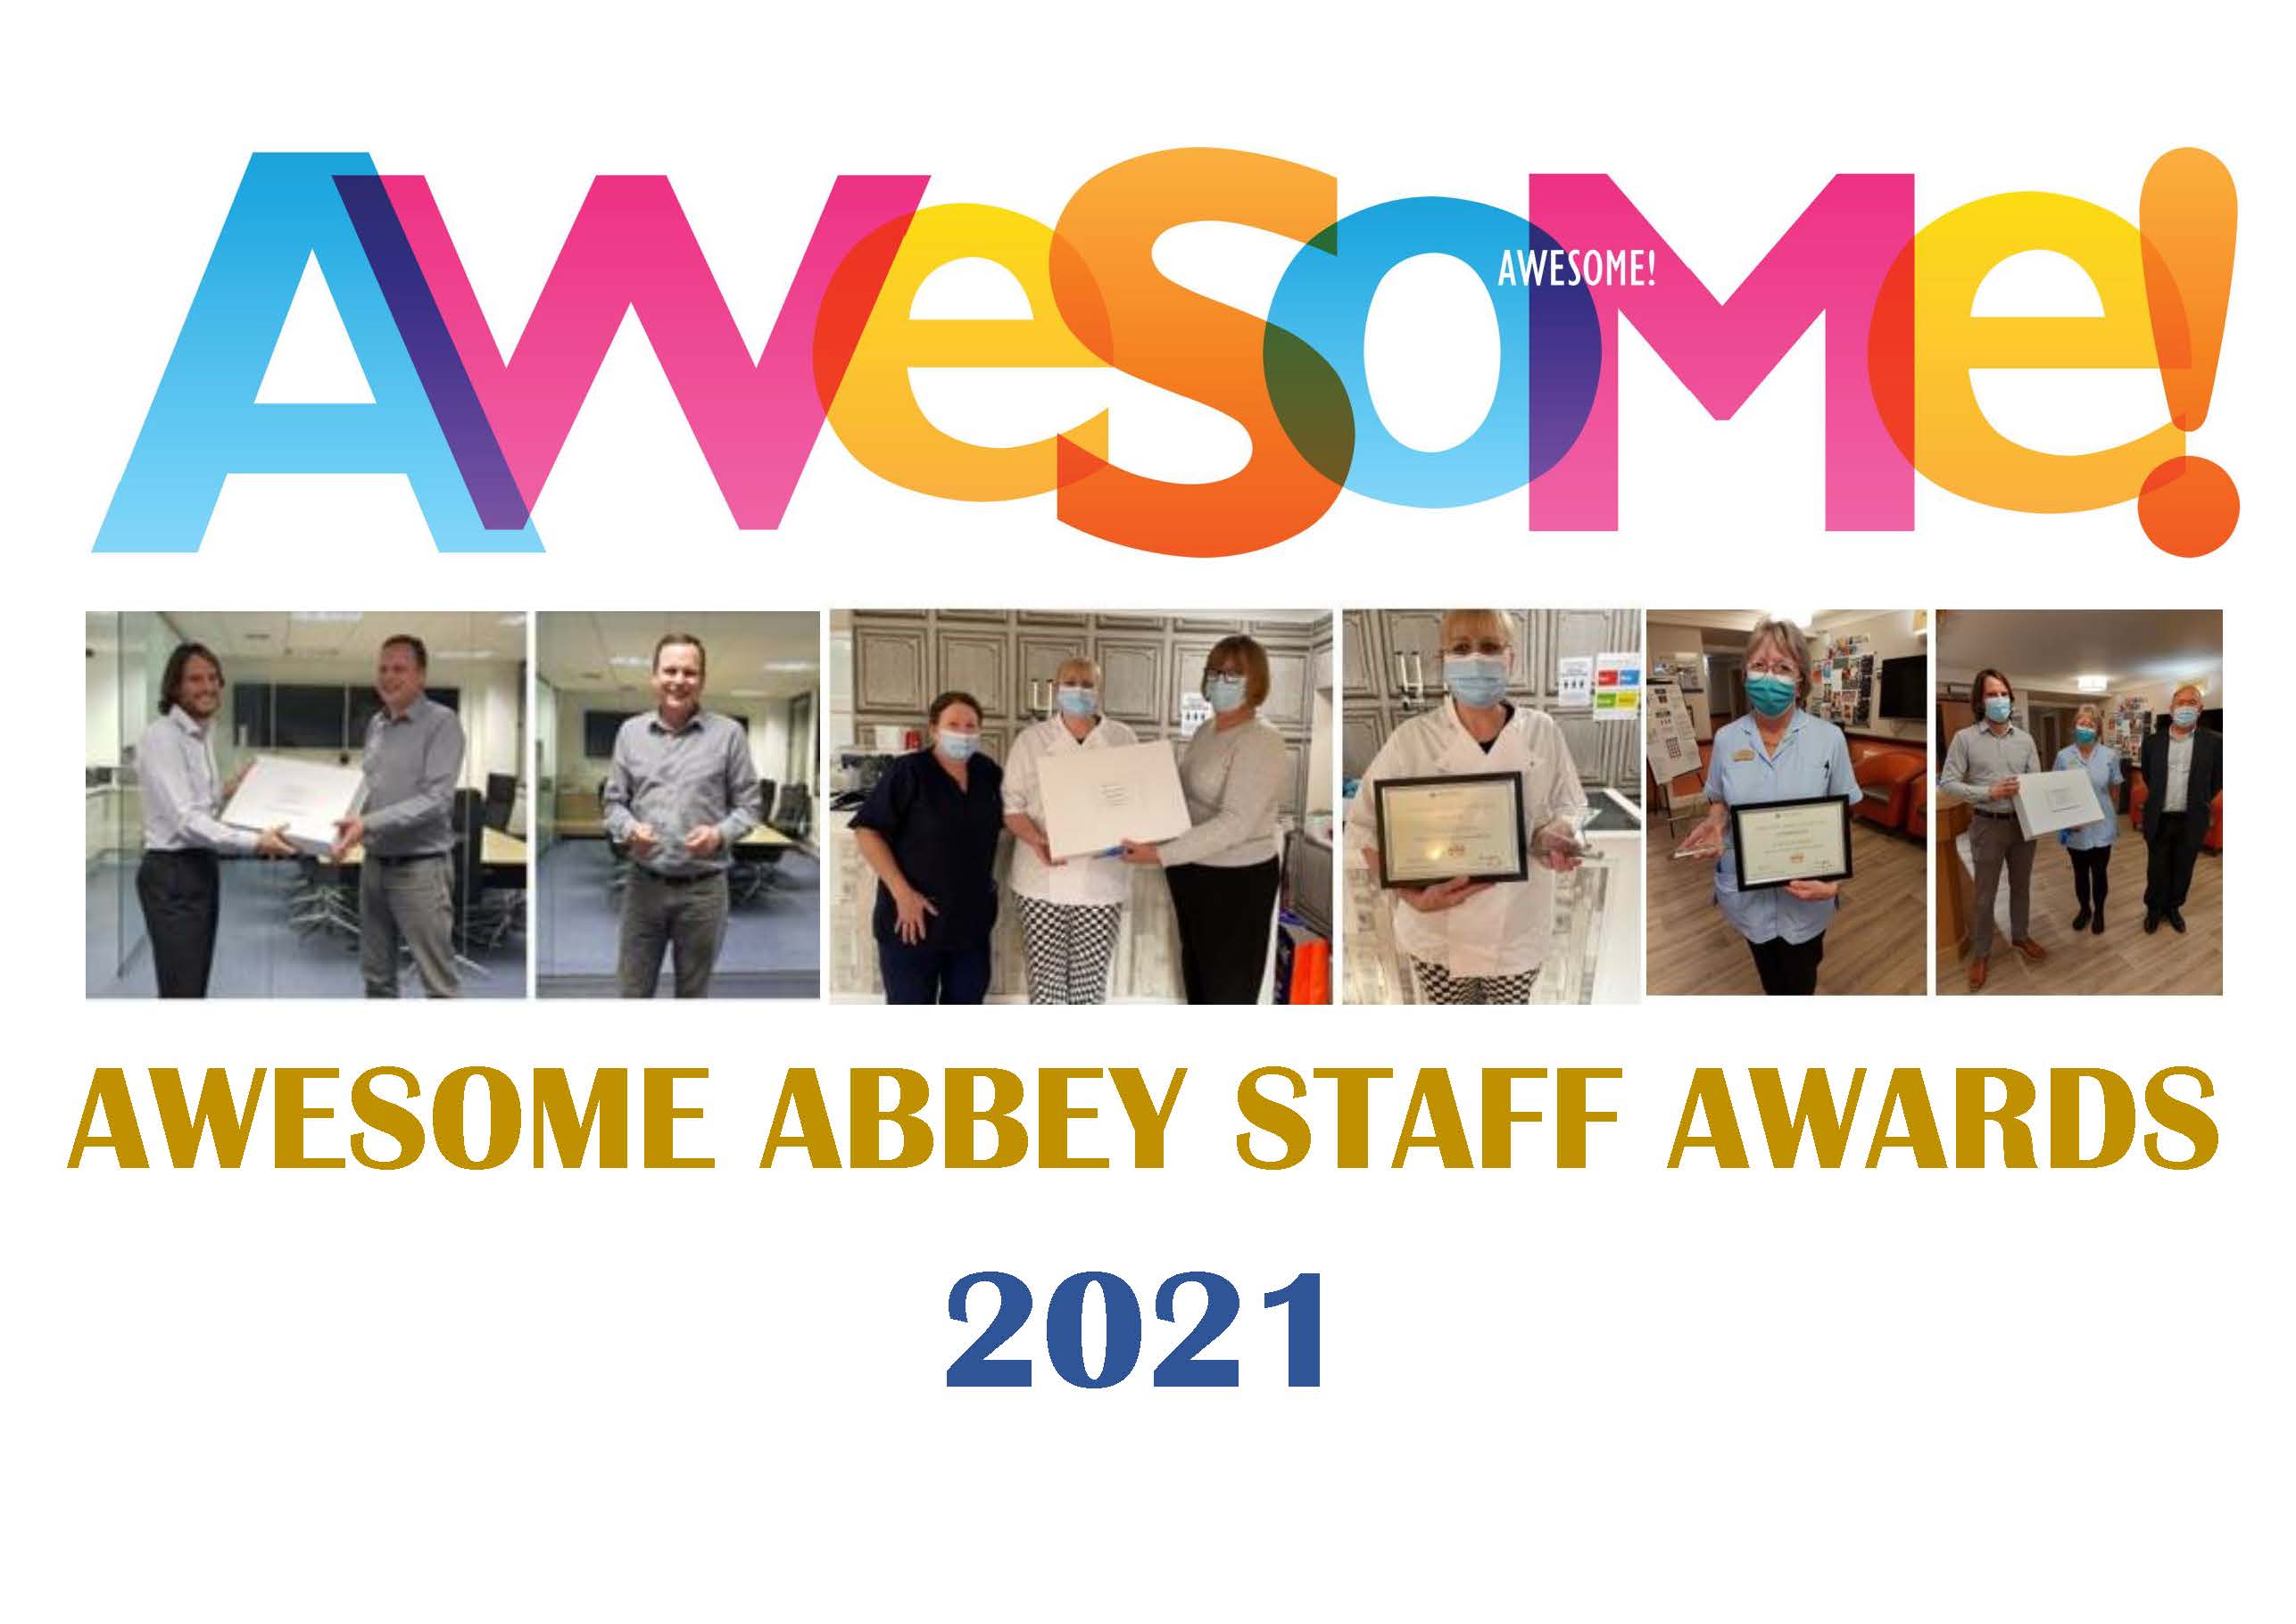 Abbey Healthcare Awesome Staff Awards 2021